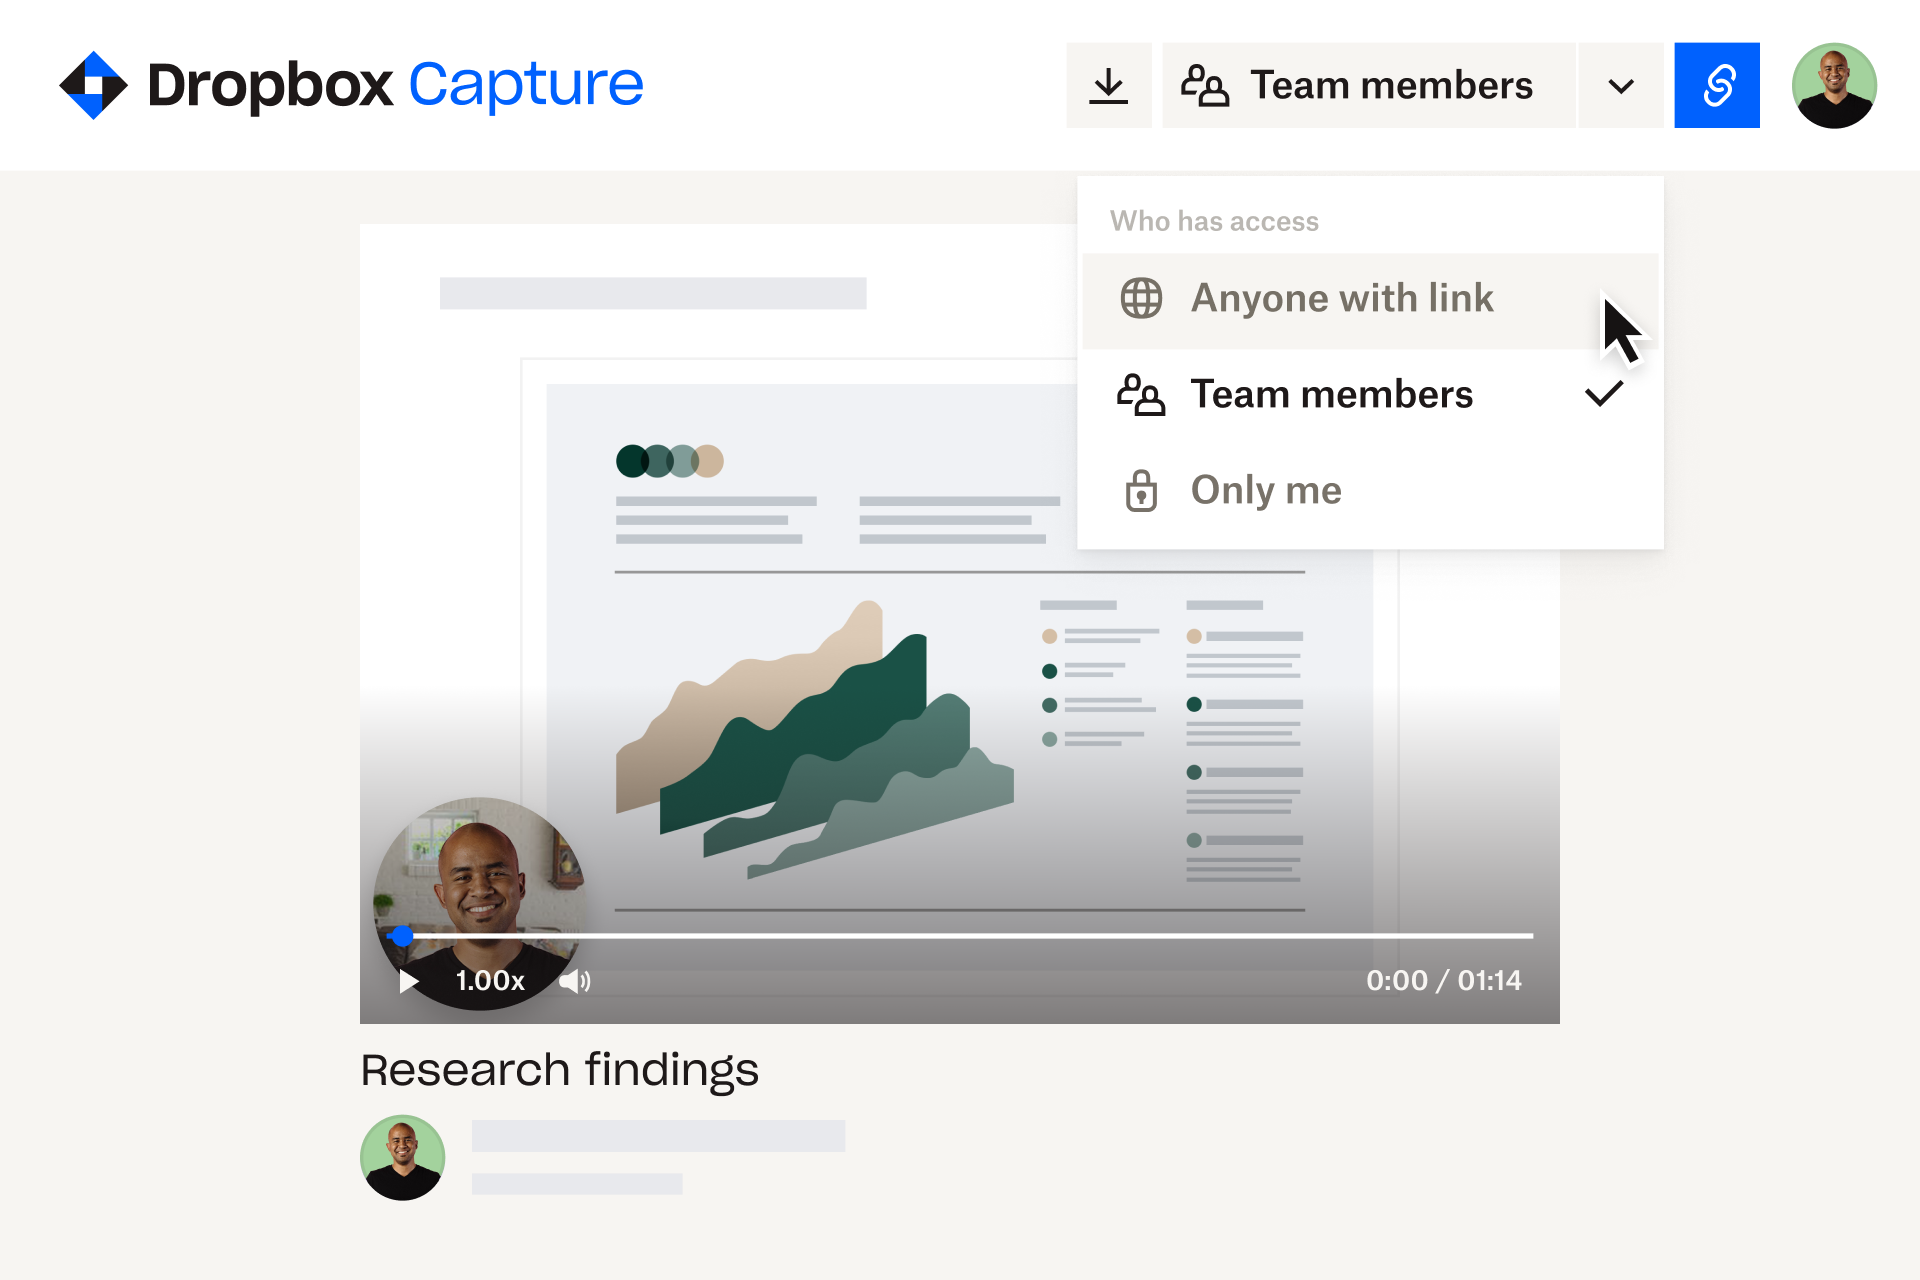  - User selecting the “team members” option in the “who has access” dropdown of a Dropbox Capture video